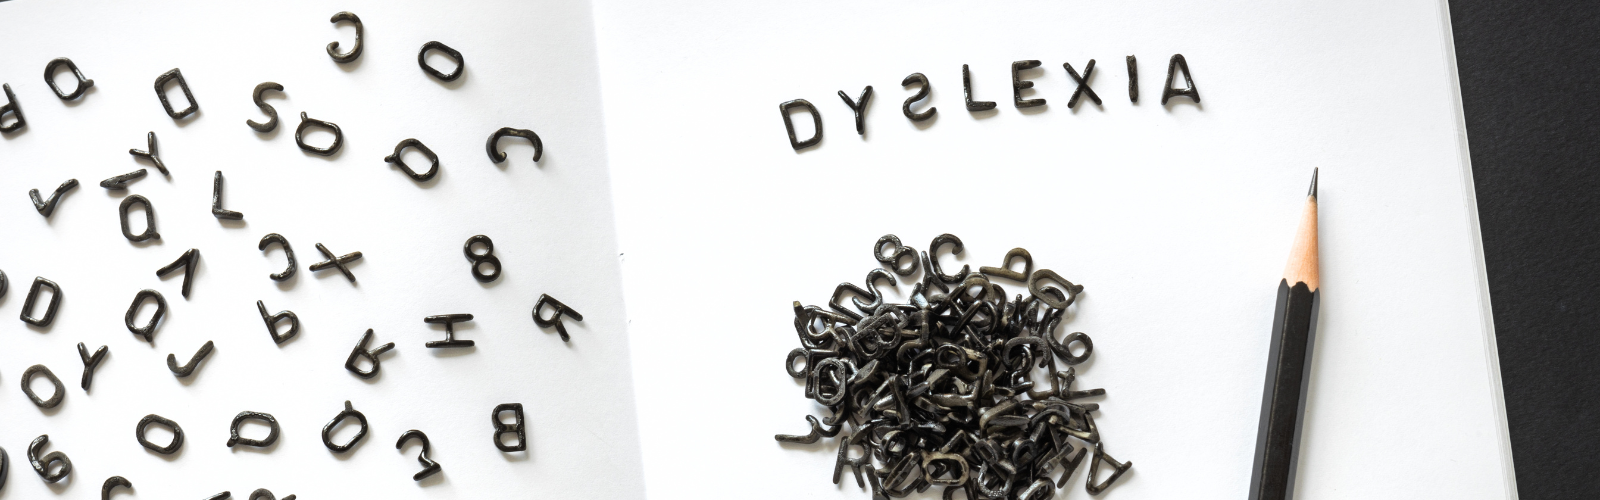 image of dyslexia letters